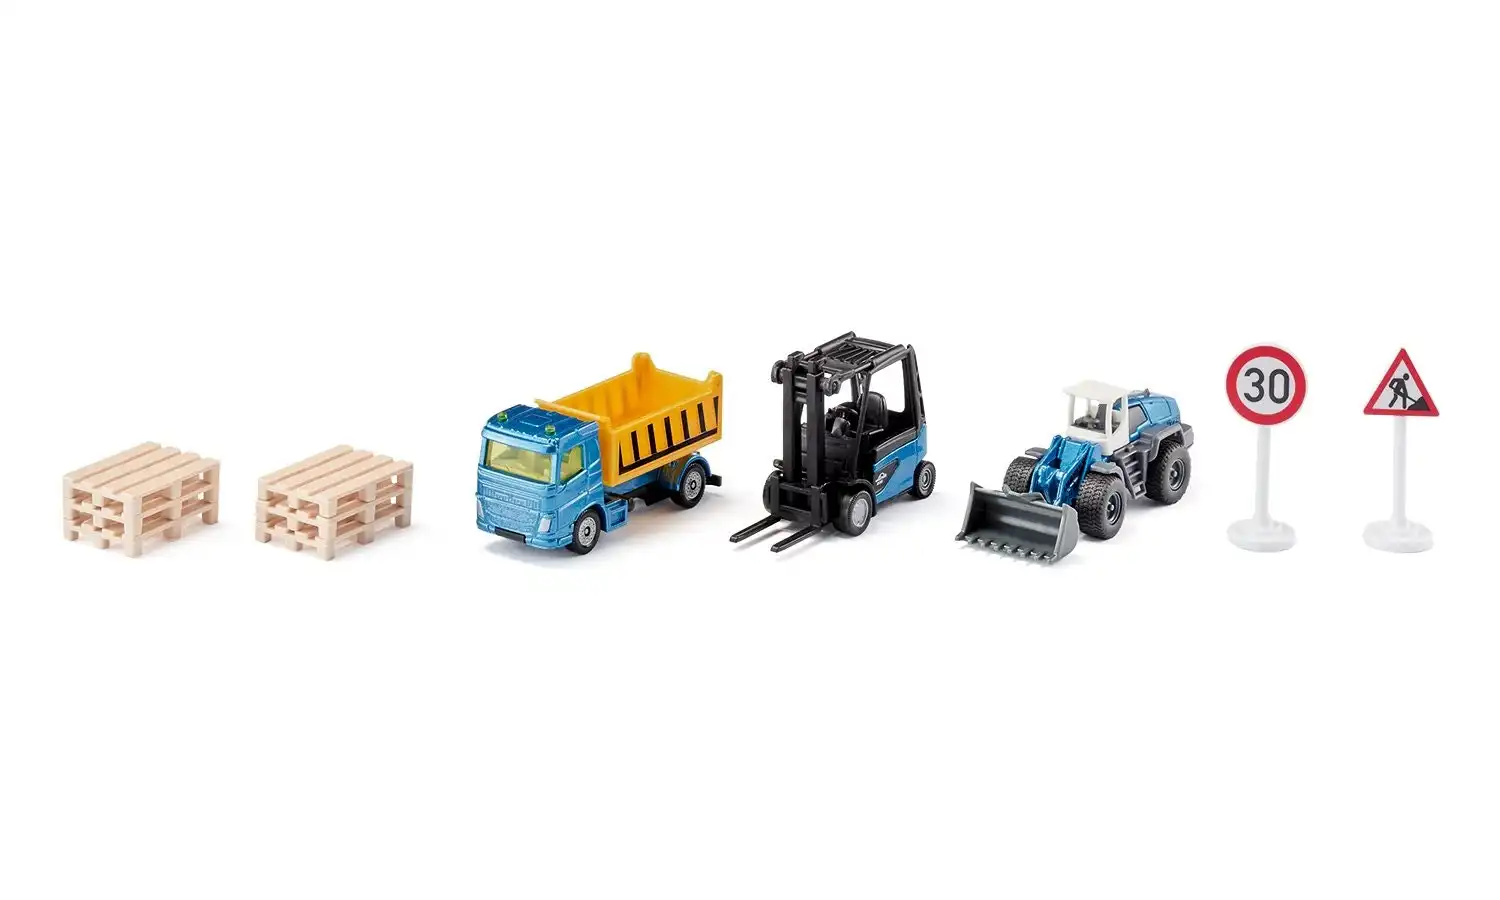 Siku - Construction Site Gift Set - 3 Vehicle And Accessory Playset